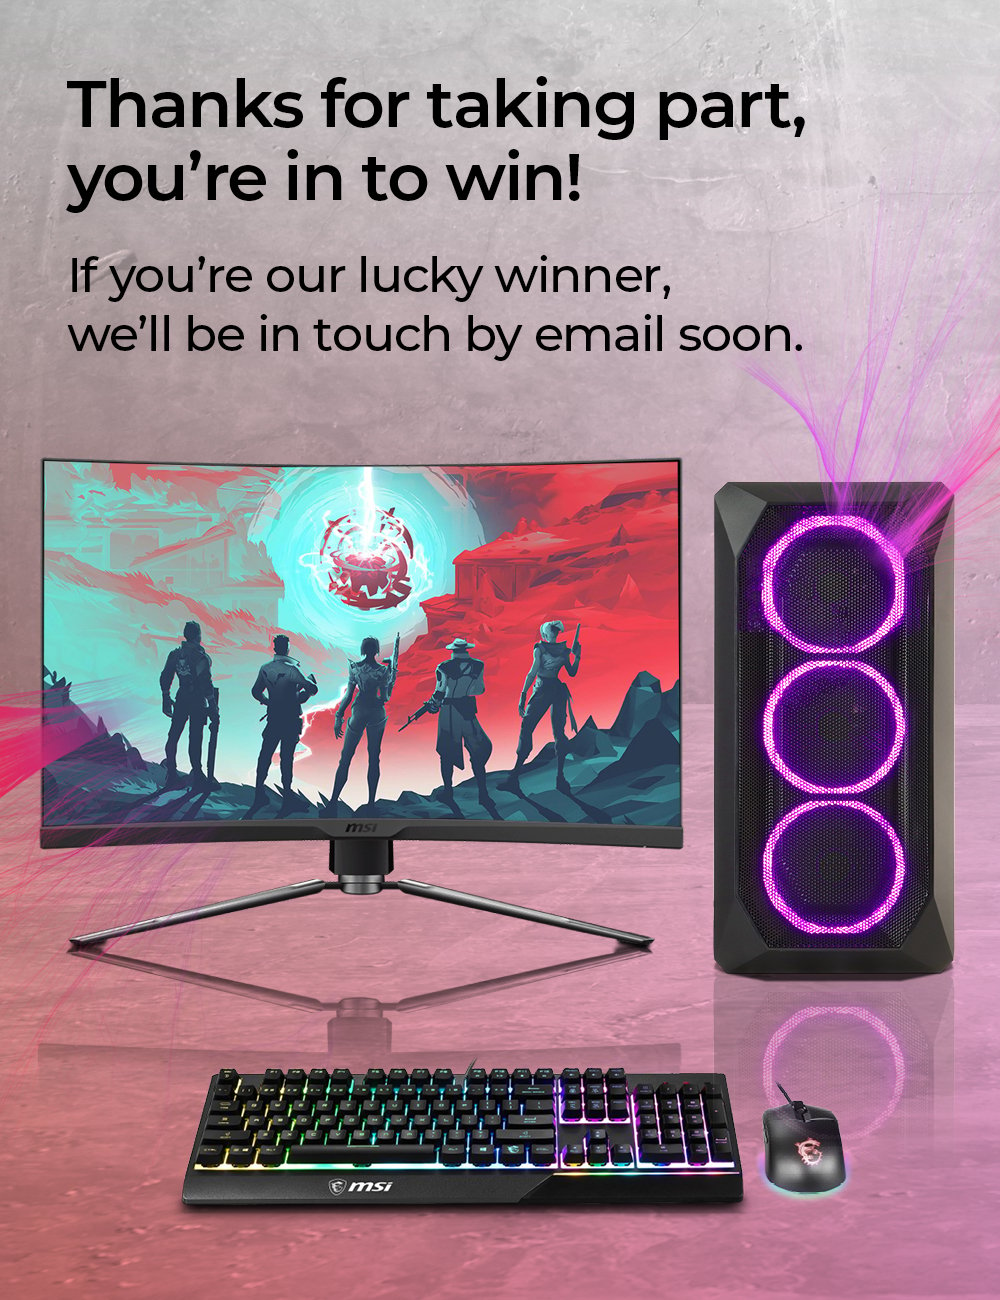 Main banner for the Nominate a gamer custom PC giveaway campaign